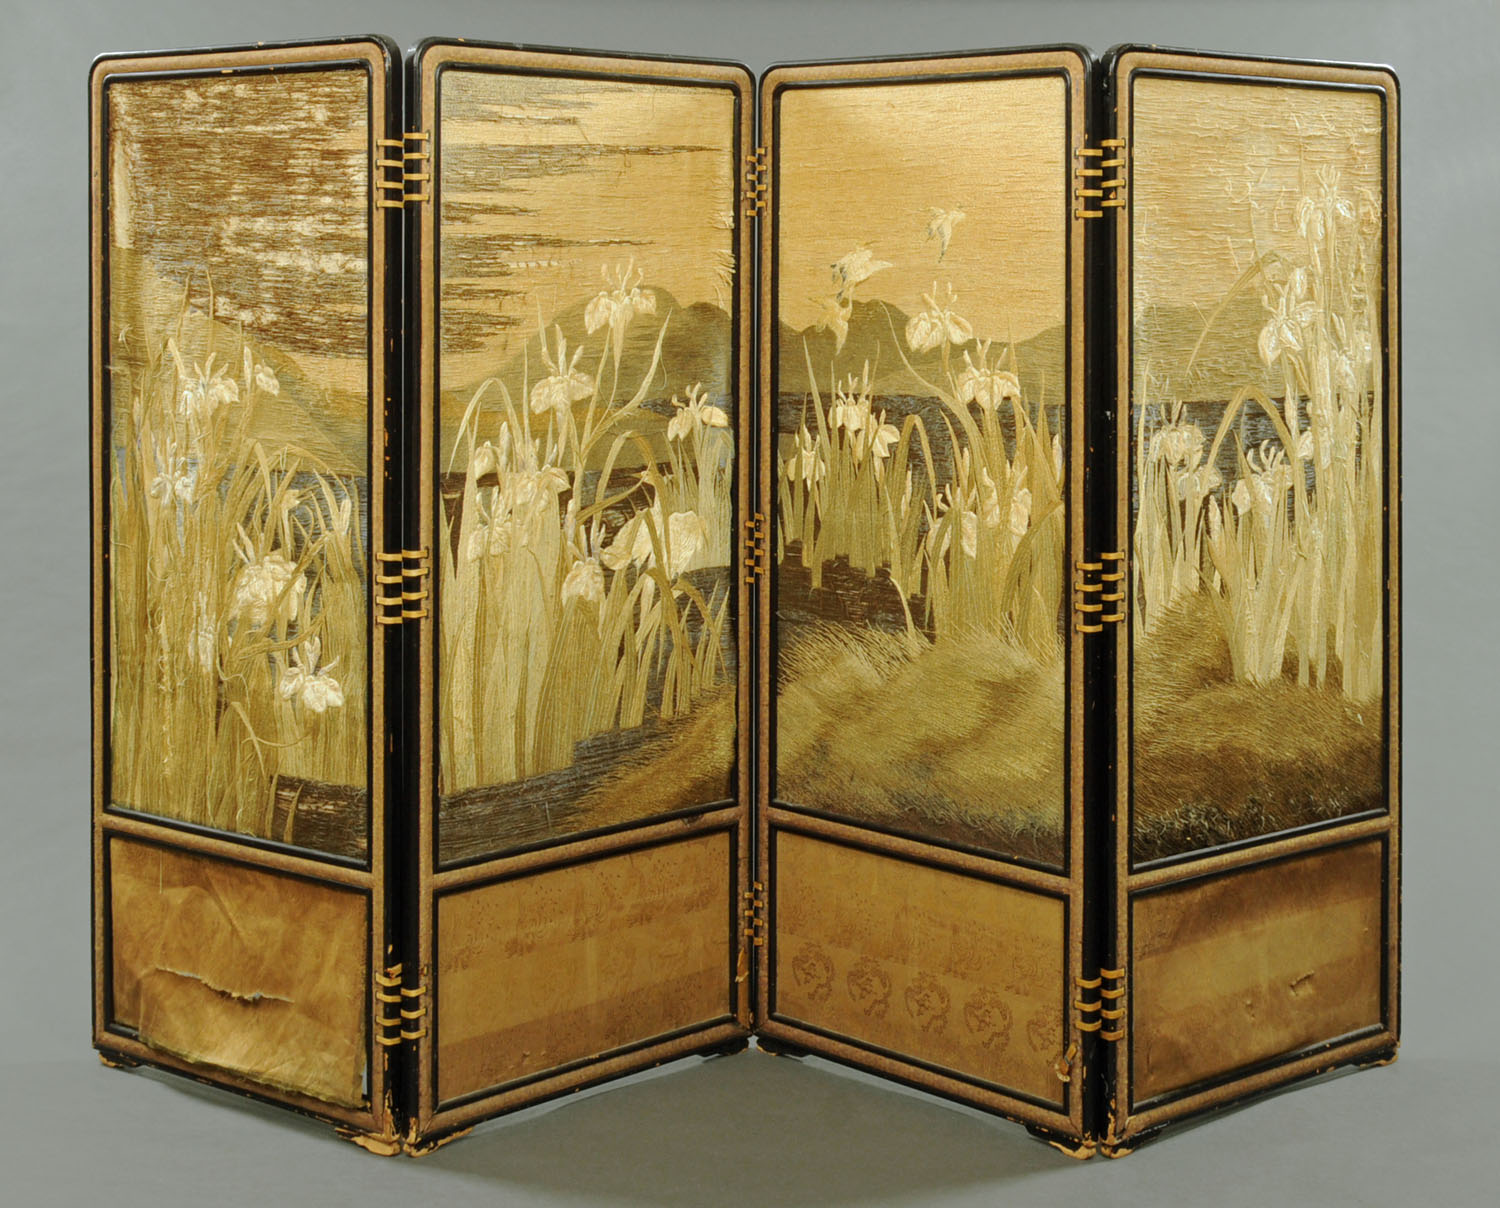 A 19th century Japanese Meiji period fourfold lacquered screen with handworked textile panels.